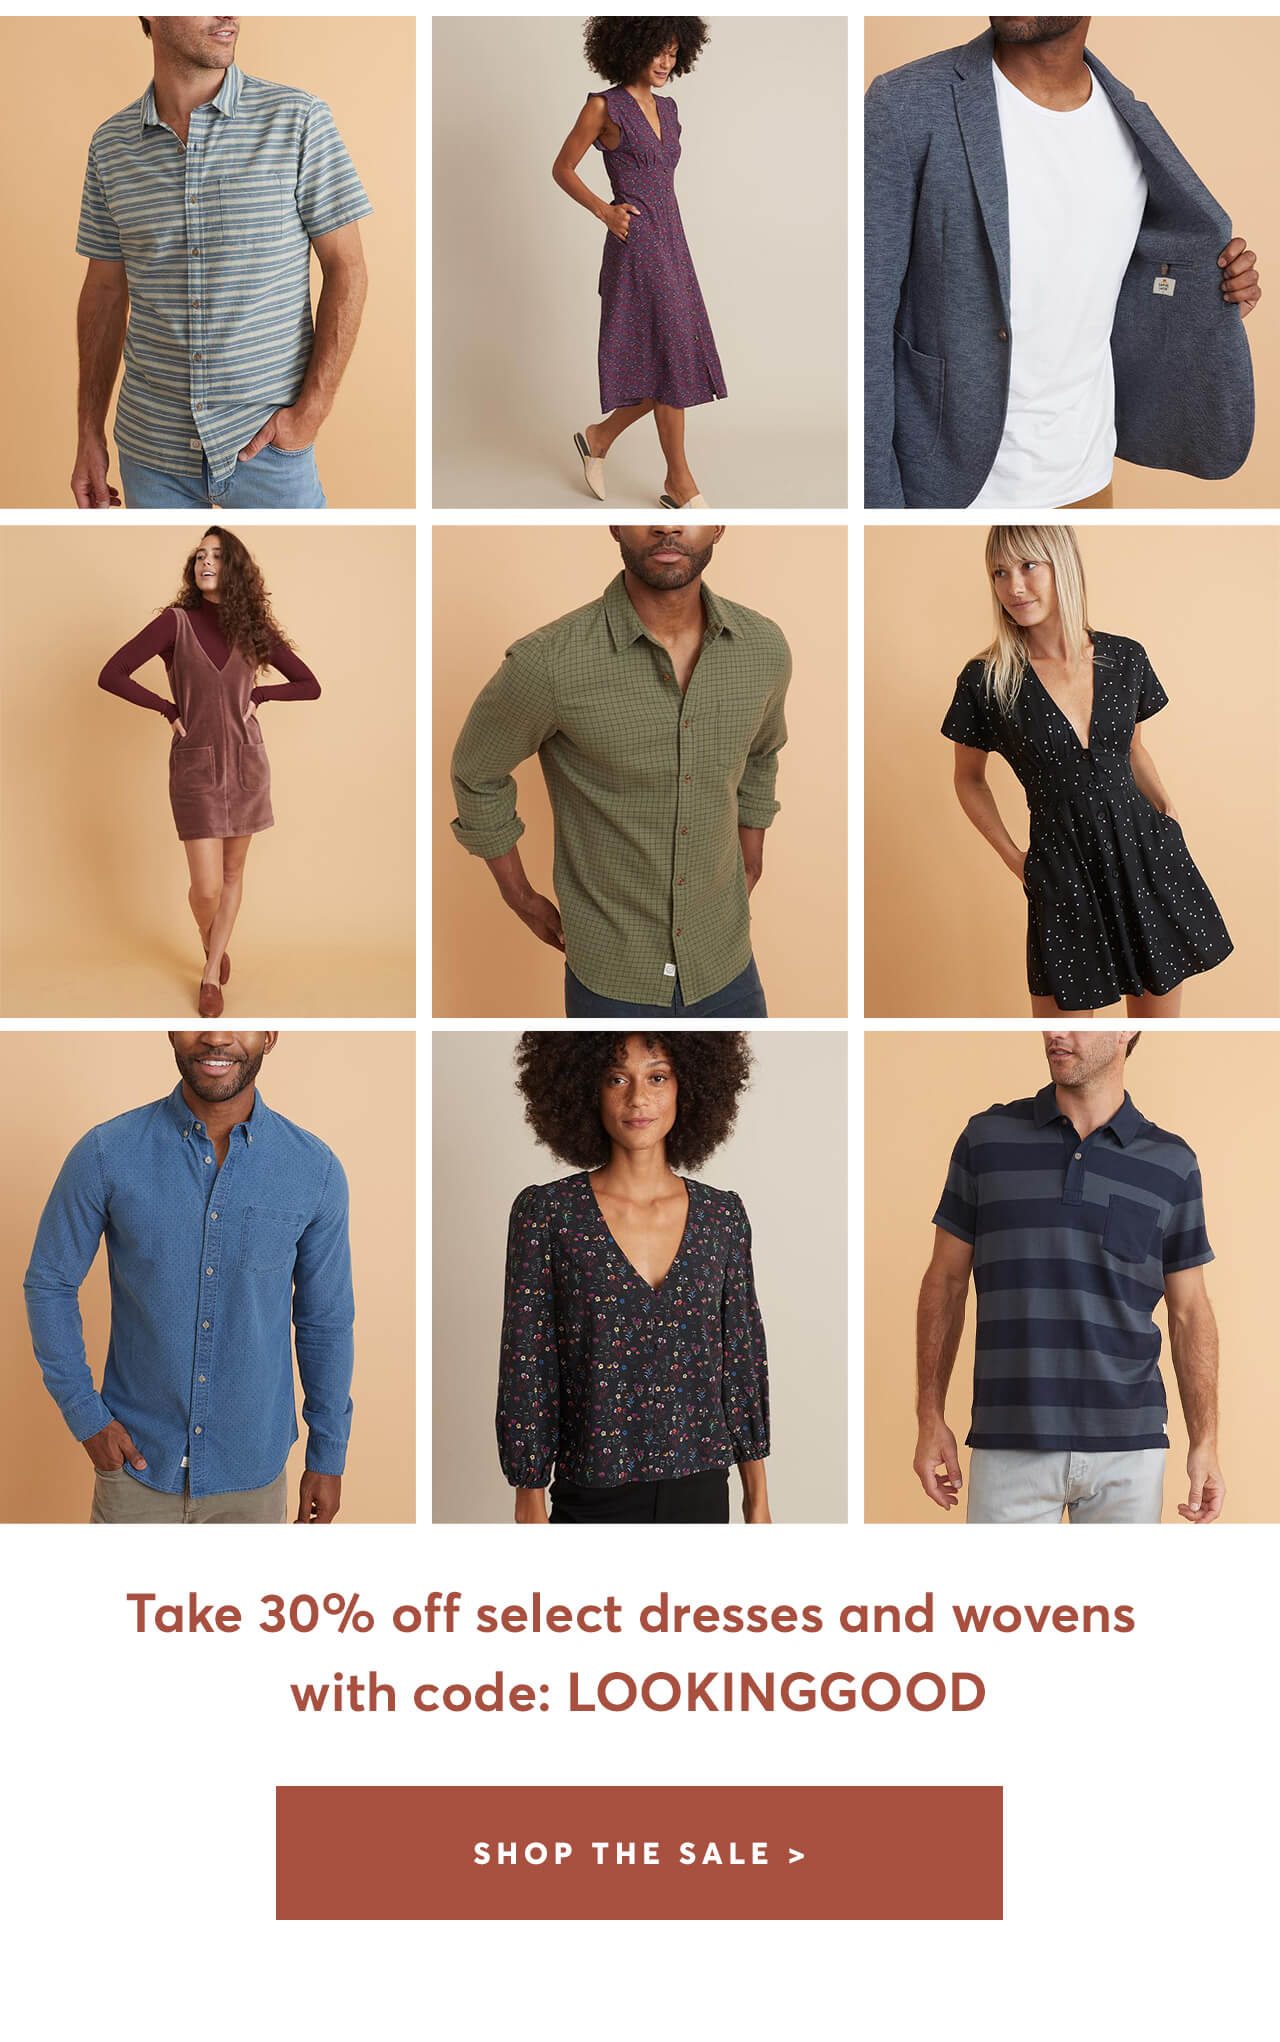 Dresses and Wovens Sale